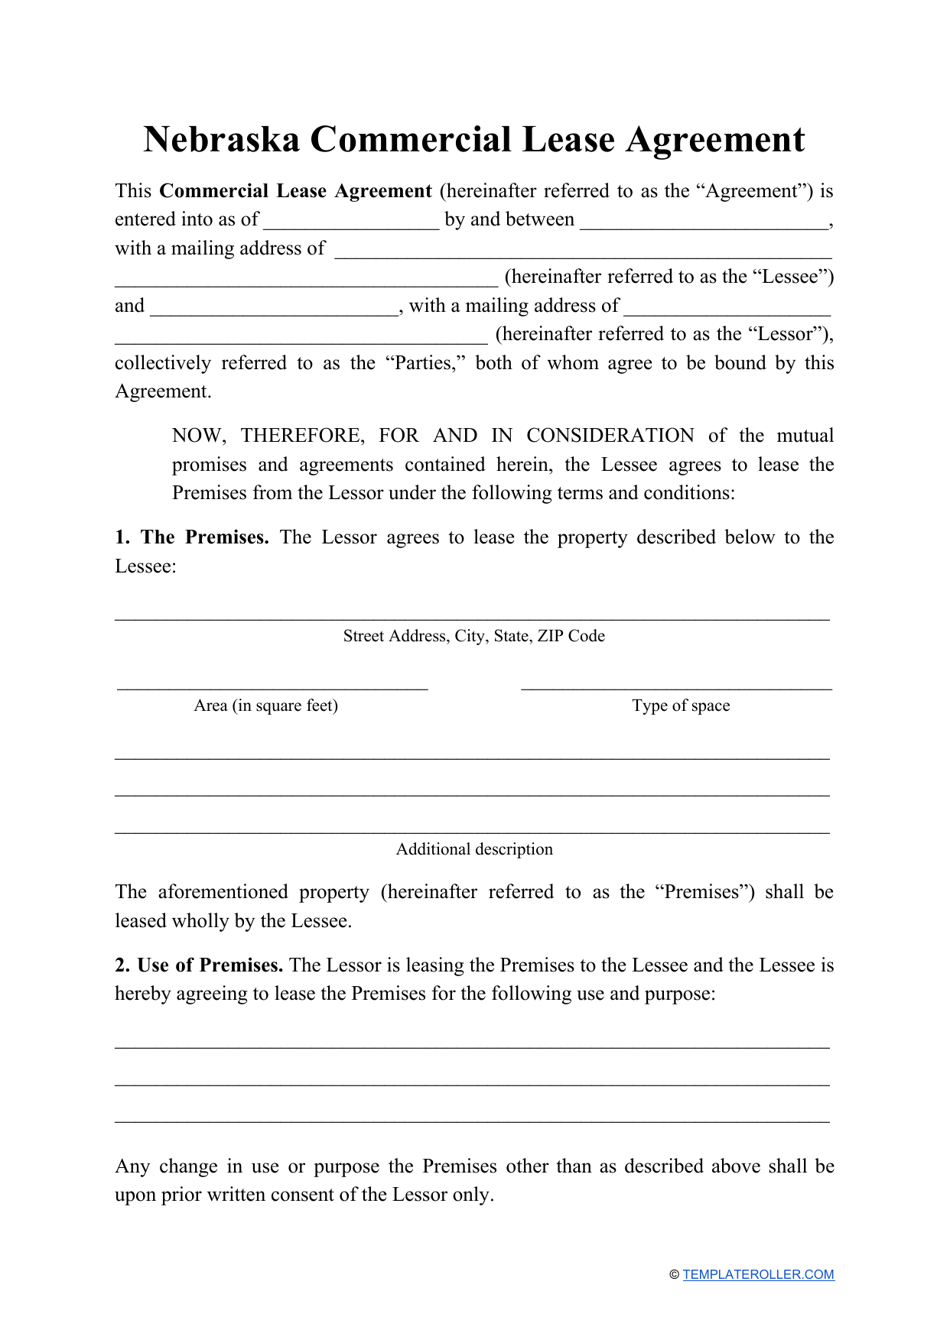 Commercial Lease Agreement Template - Nebraska, Page 1